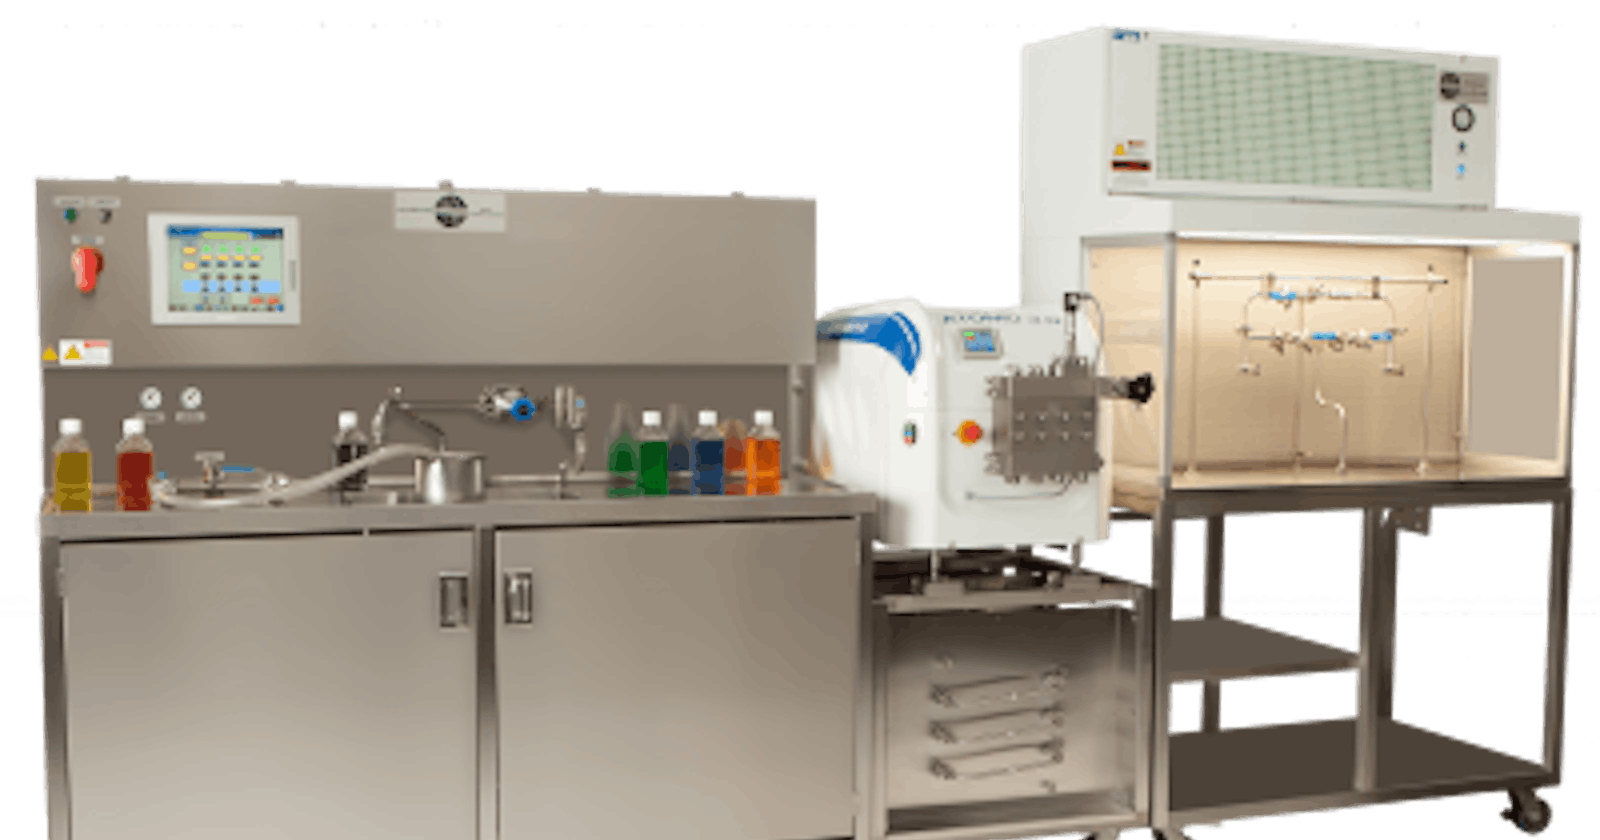 Heating Things Up: Exploring the Efficiency of HTST Pasteurization Equipment